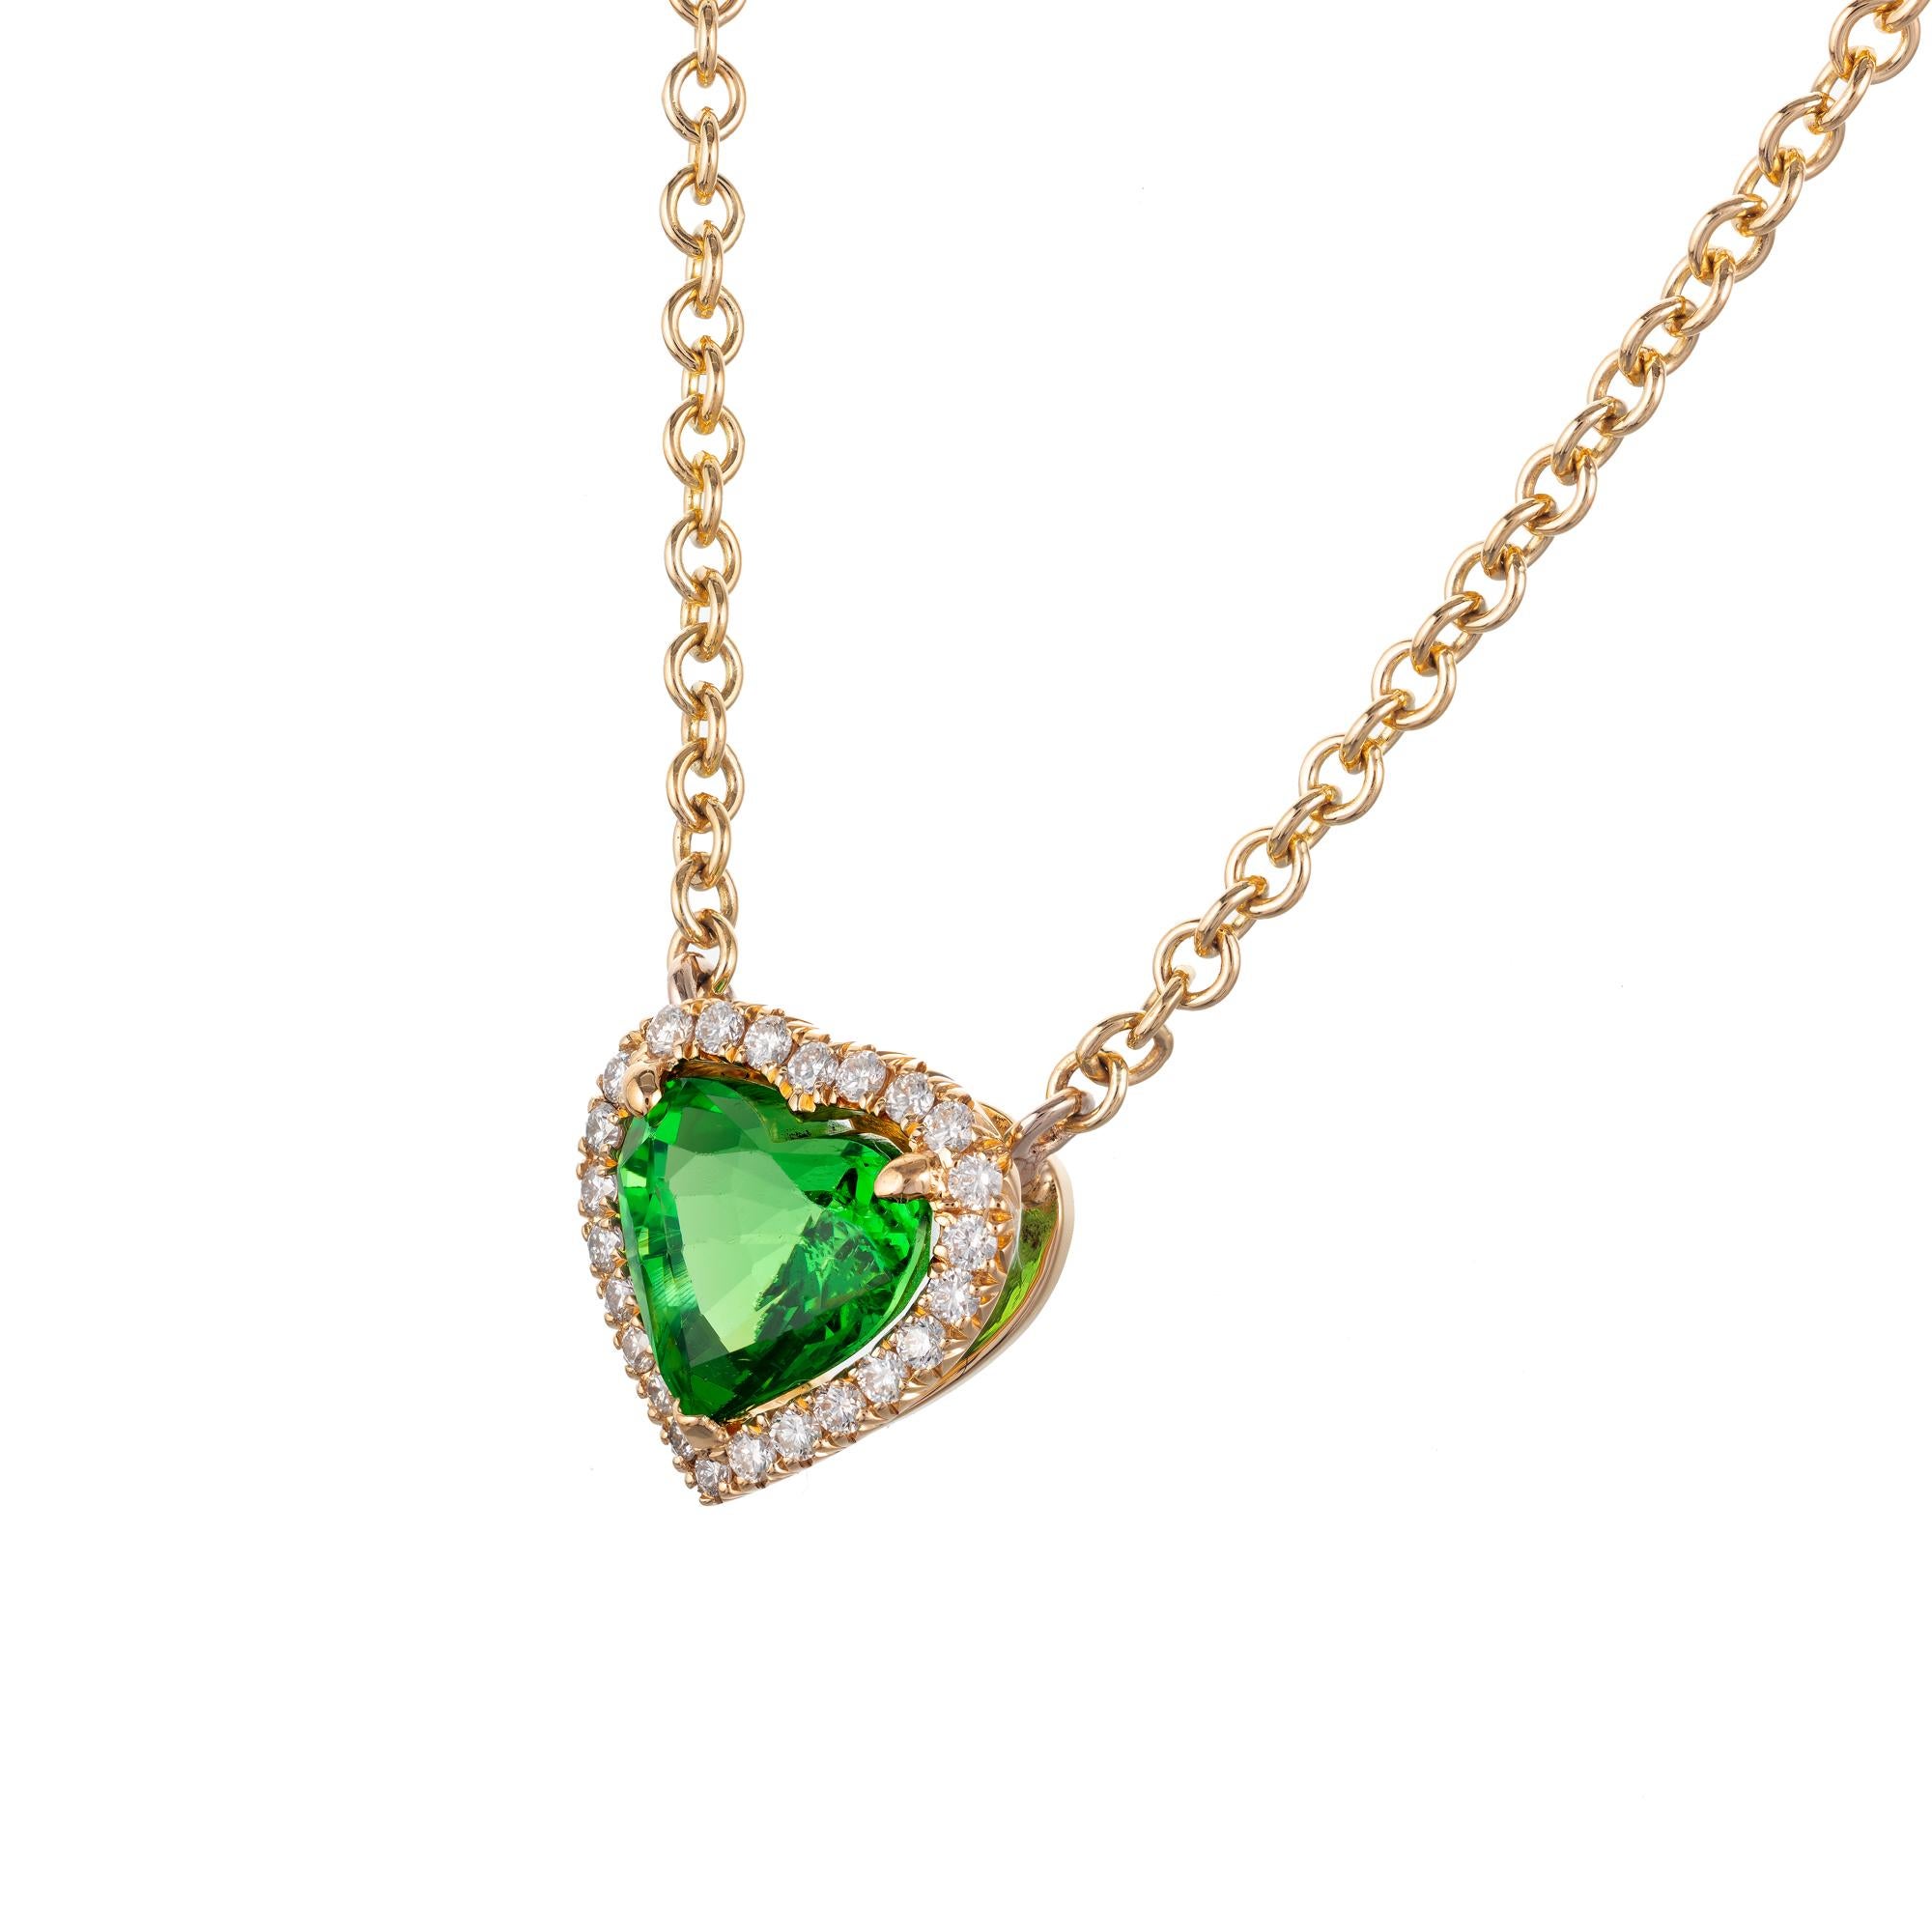 Tsavoraite green garnet heart shaped and diamond halo pendant necklace in 18k yellow gold.  The pendant was made in the Peter Suchy workshop. GIA certified. 

1 heart shaped green SI tsavorite garnet, Approximate 1.88cts GIA Certificate #